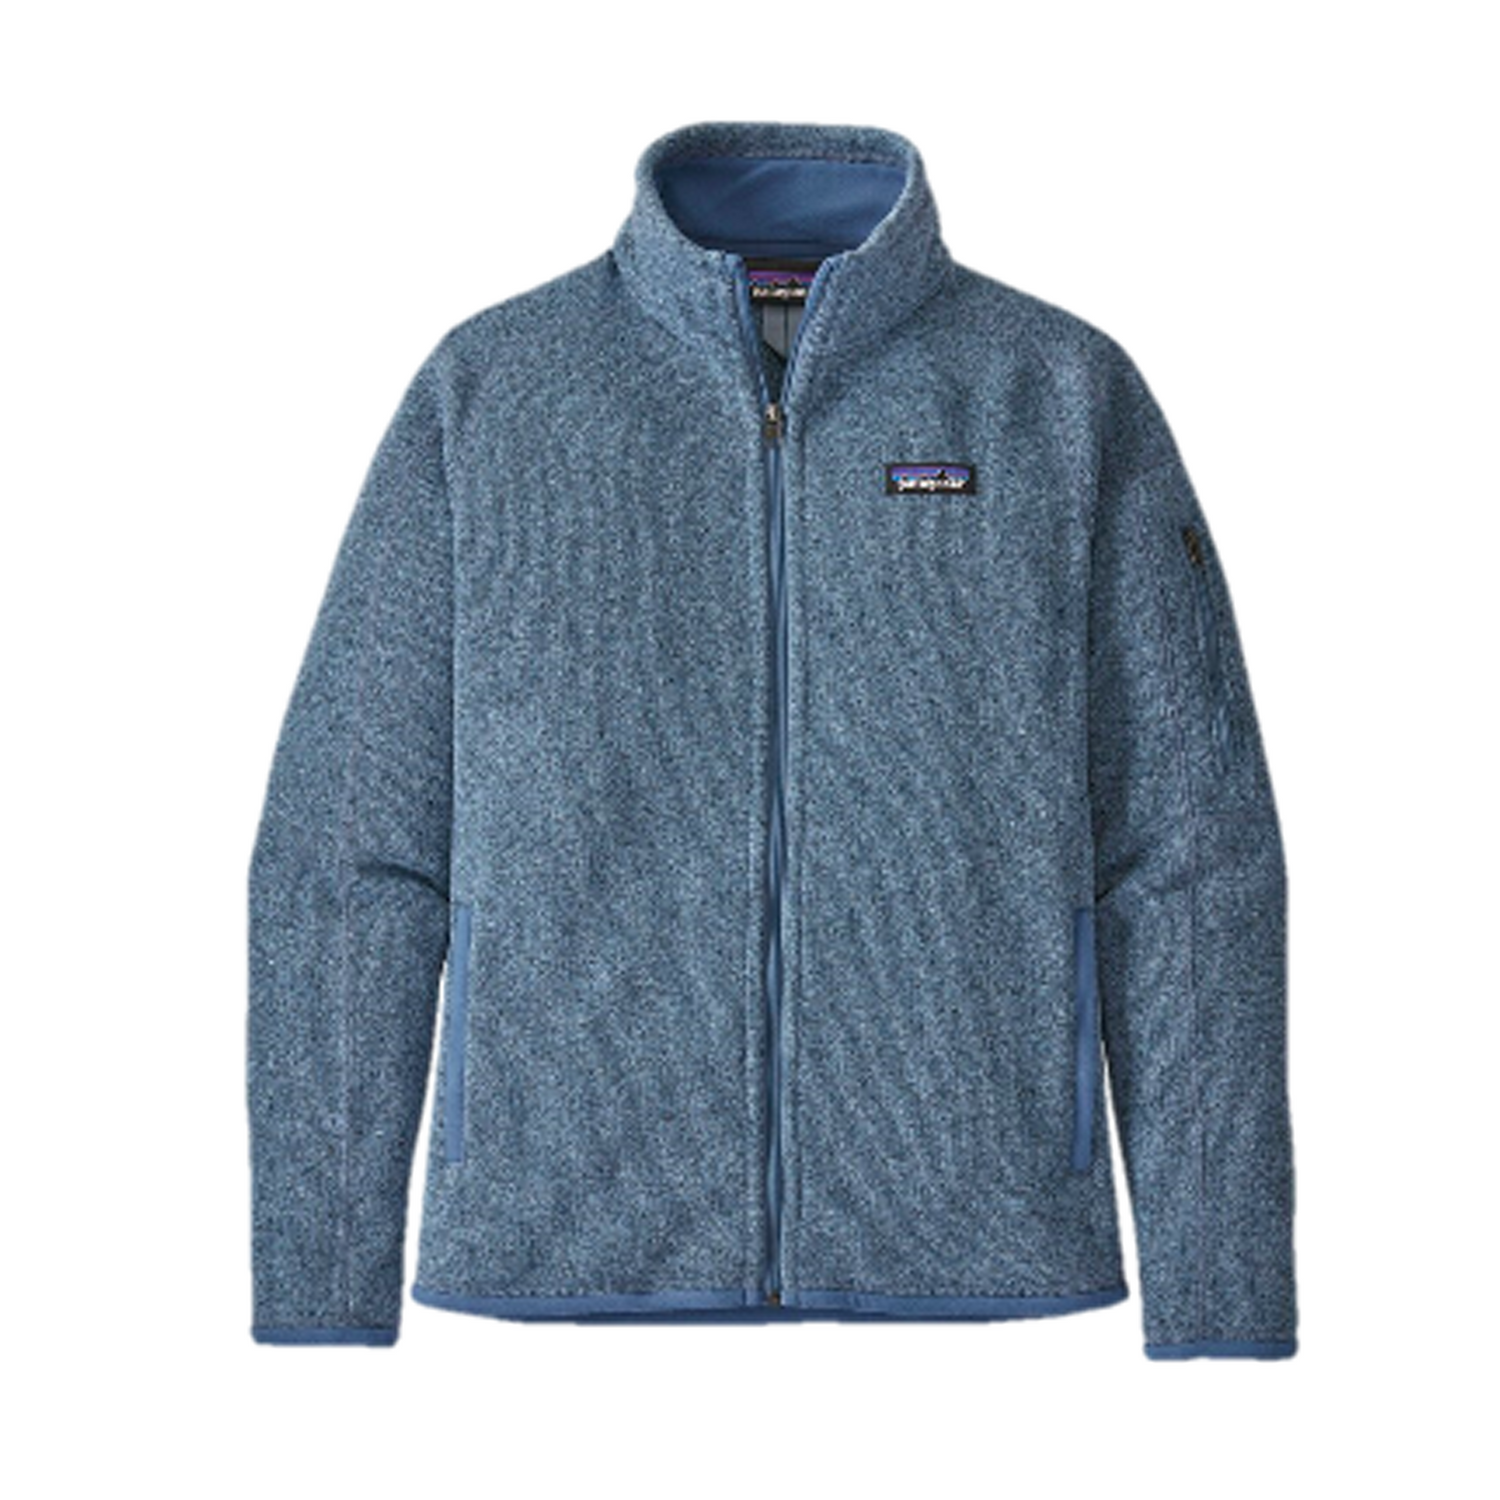 Patagonia Women's full zip fleece better sweater in the colour blue.